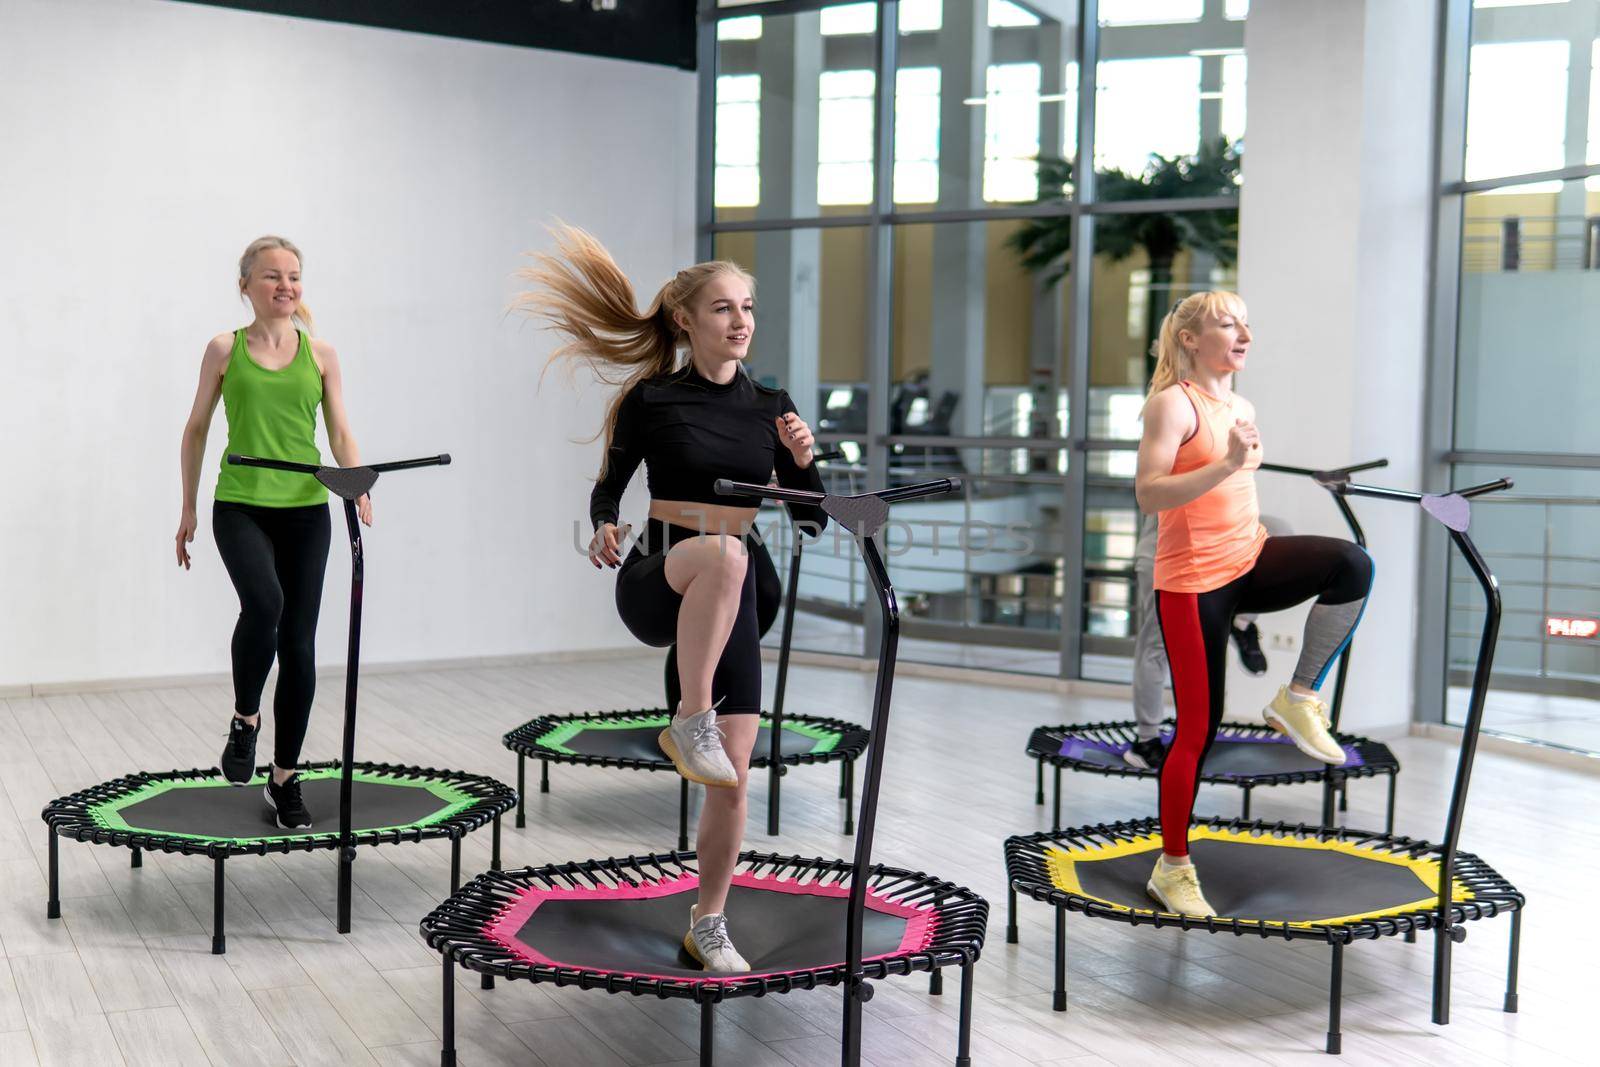 Trampoline for fitness girls are engaged in professional sports, the concept of a healthy lifestyle jumping trampoline woman fitness sport training, from workout active in lifestyle from body trainer, club vitality. Sportswear fly motion, balance by 89167702191